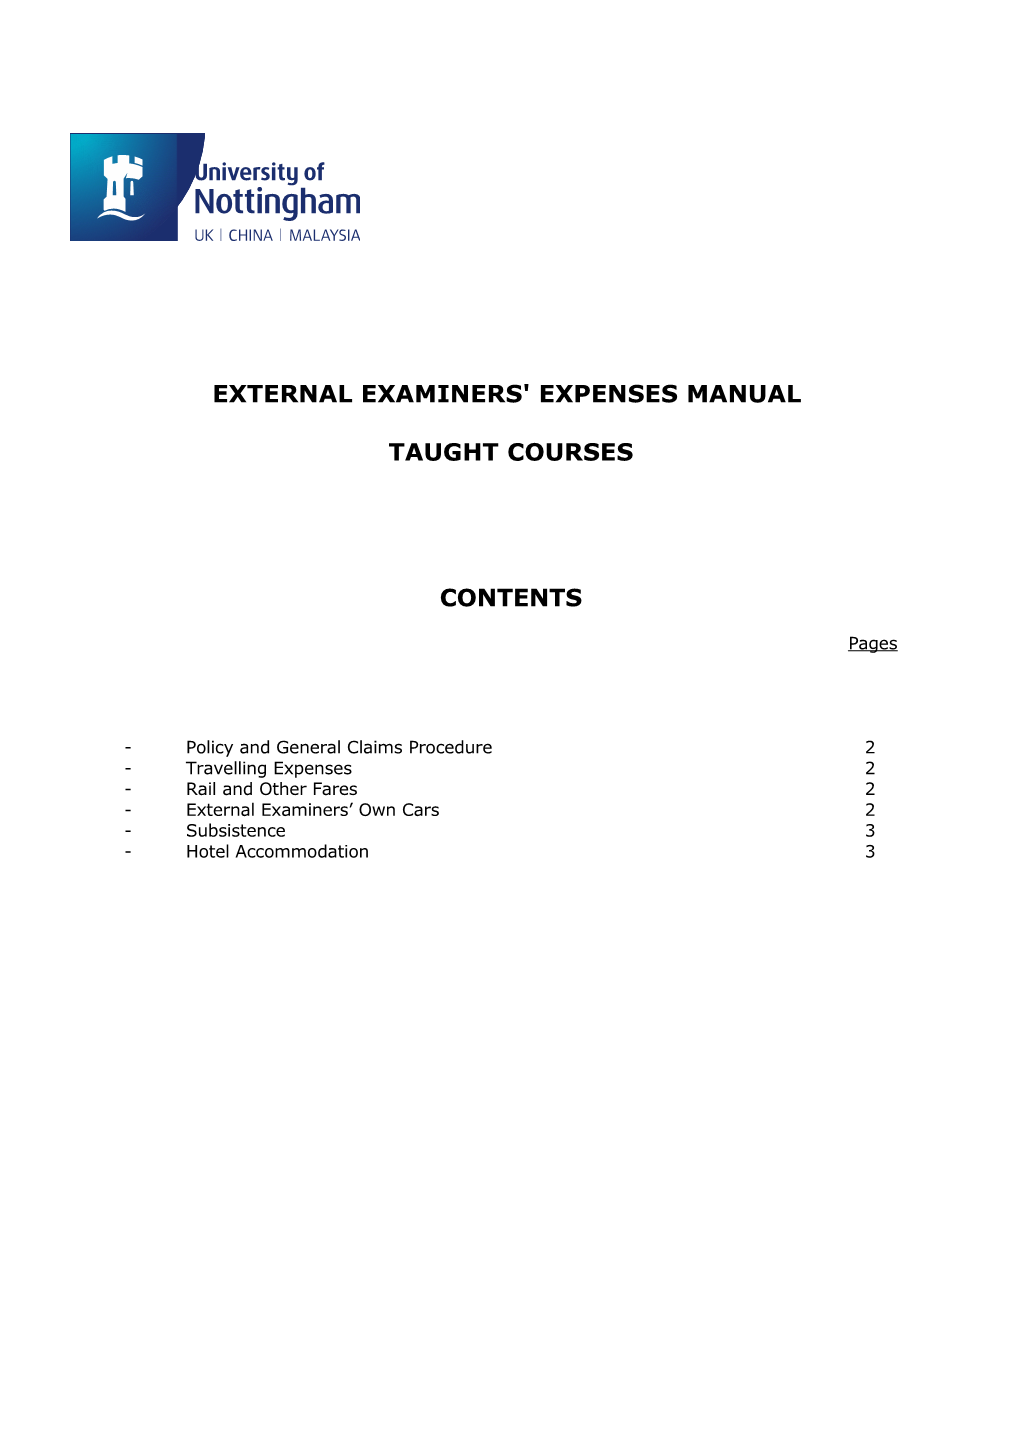 External Examiners' Expenses Manual